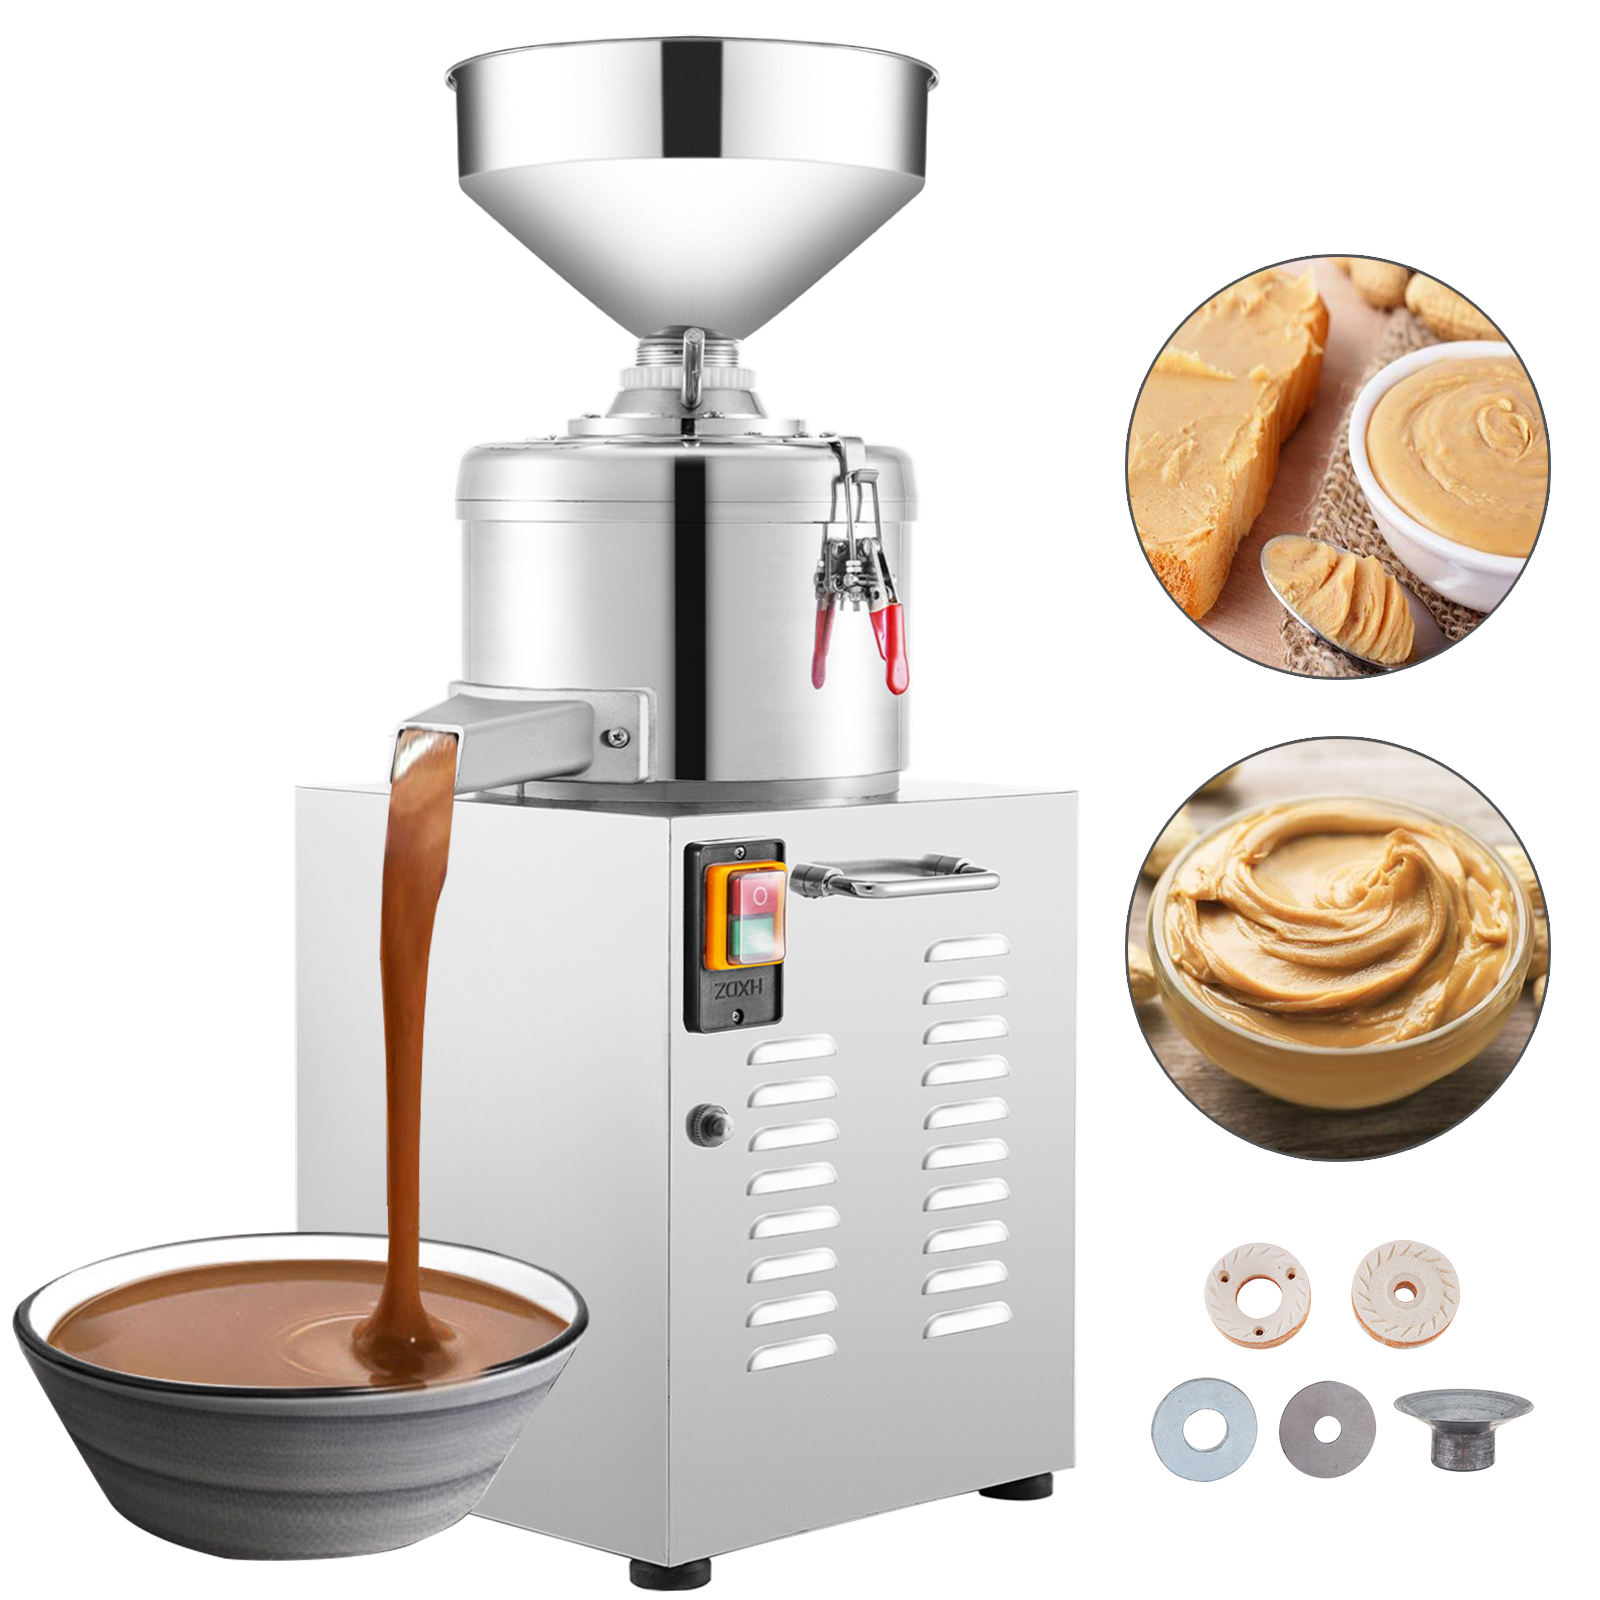 CG-160R Stainless steel automatic high-precision peanut butter grinding machine nutrient-rich cost-saving processing capacity 35kg/h - Grain Grinder - 1